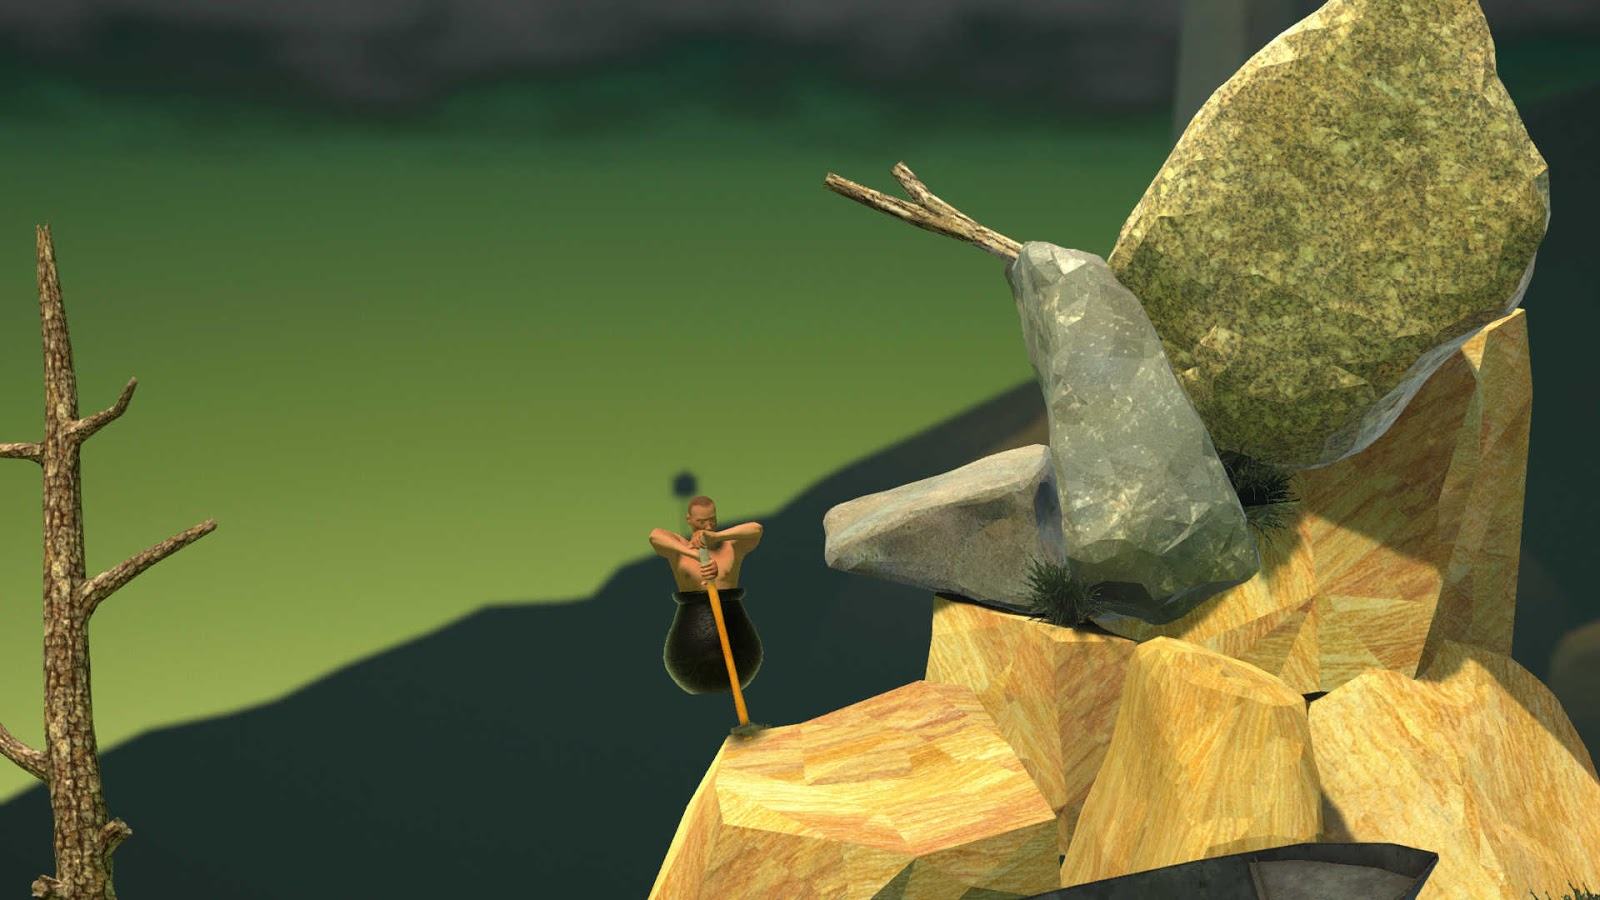 Getting Over It with Bennett Foddy 1